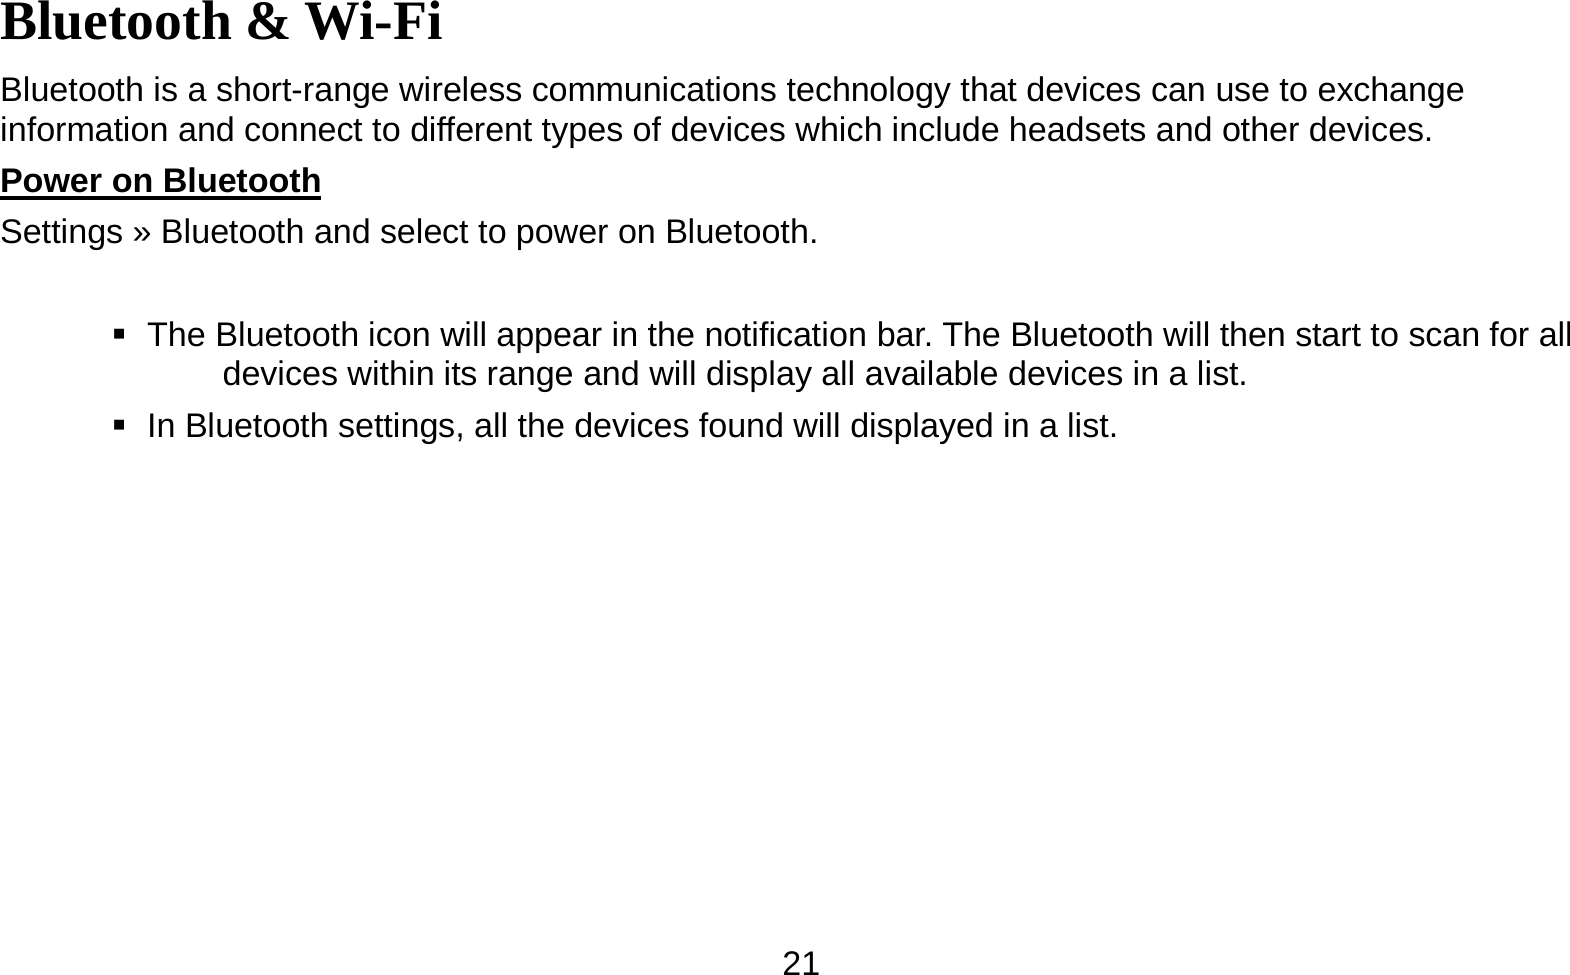   21Bluetooth &amp; Wi-Fi Bluetooth is a short-range wireless communications technology that devices can use to exchange information and connect to different types of devices which include headsets and other devices. Power on Bluetooth                                                                                Settings » Bluetooth and select to power on Bluetooth.     The Bluetooth icon will appear in the notification bar. The Bluetooth will then start to scan for all devices within its range and will display all available devices in a list.    In Bluetooth settings, all the devices found will displayed in a list.  